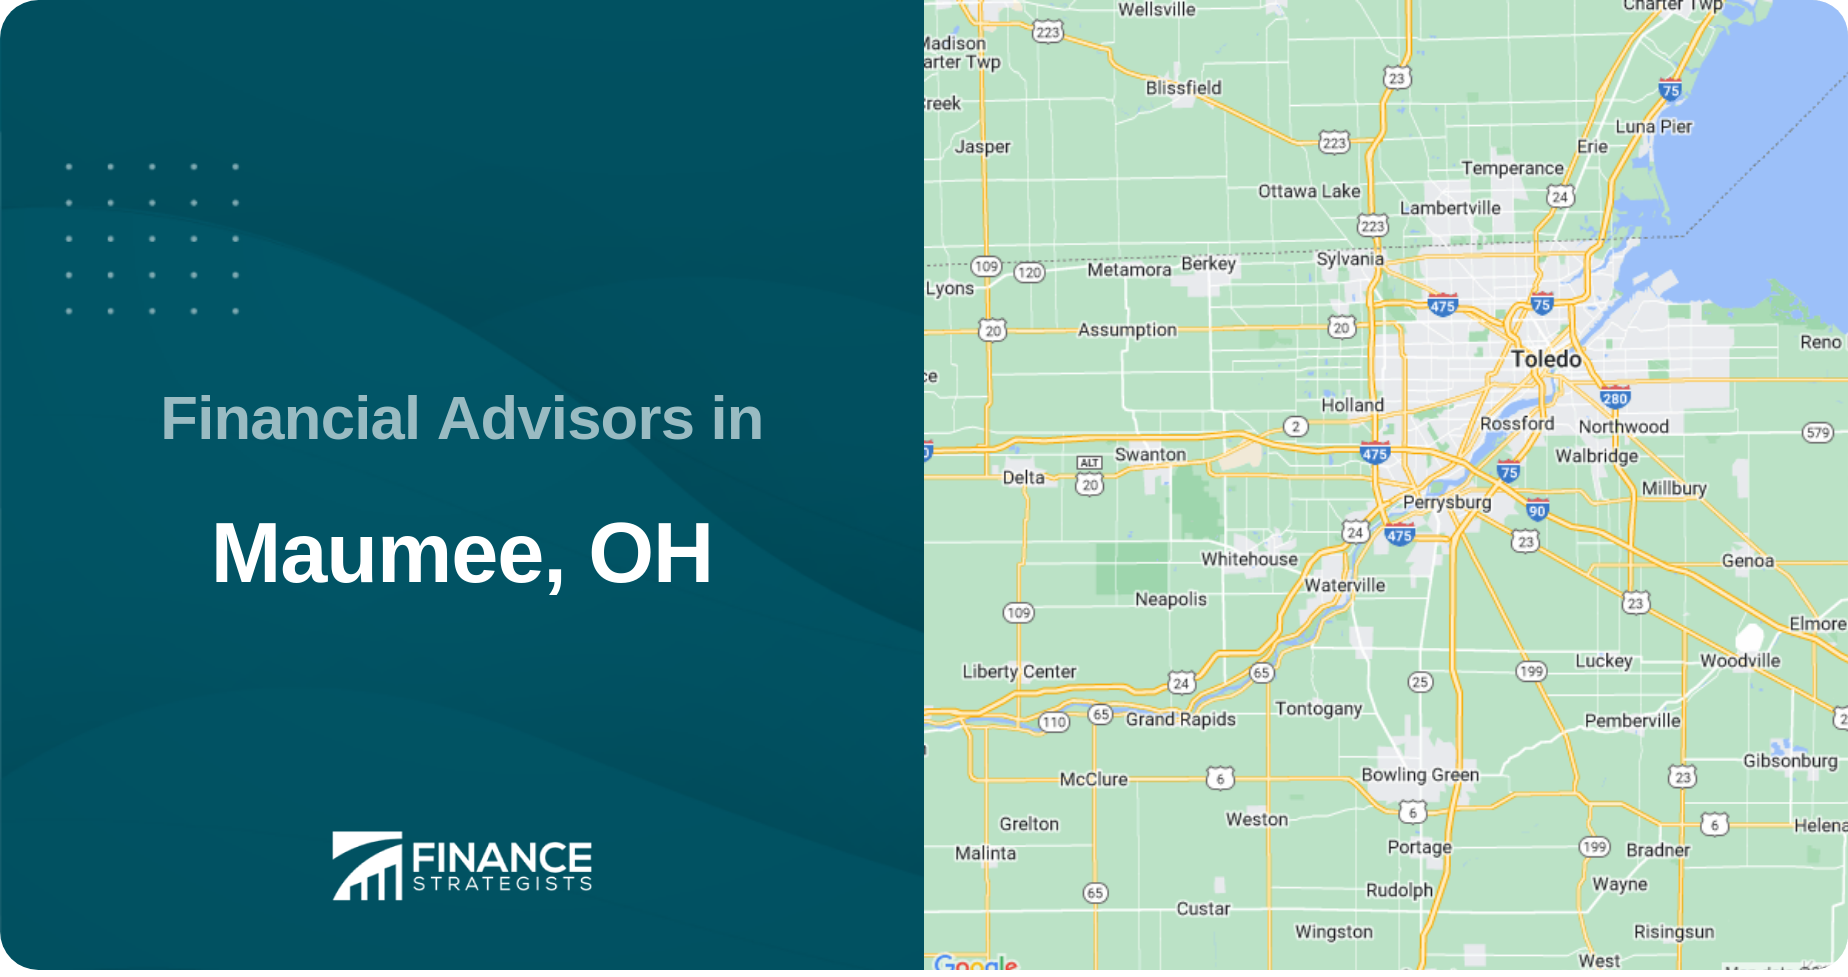 Financial Advisors in Maumee, OH